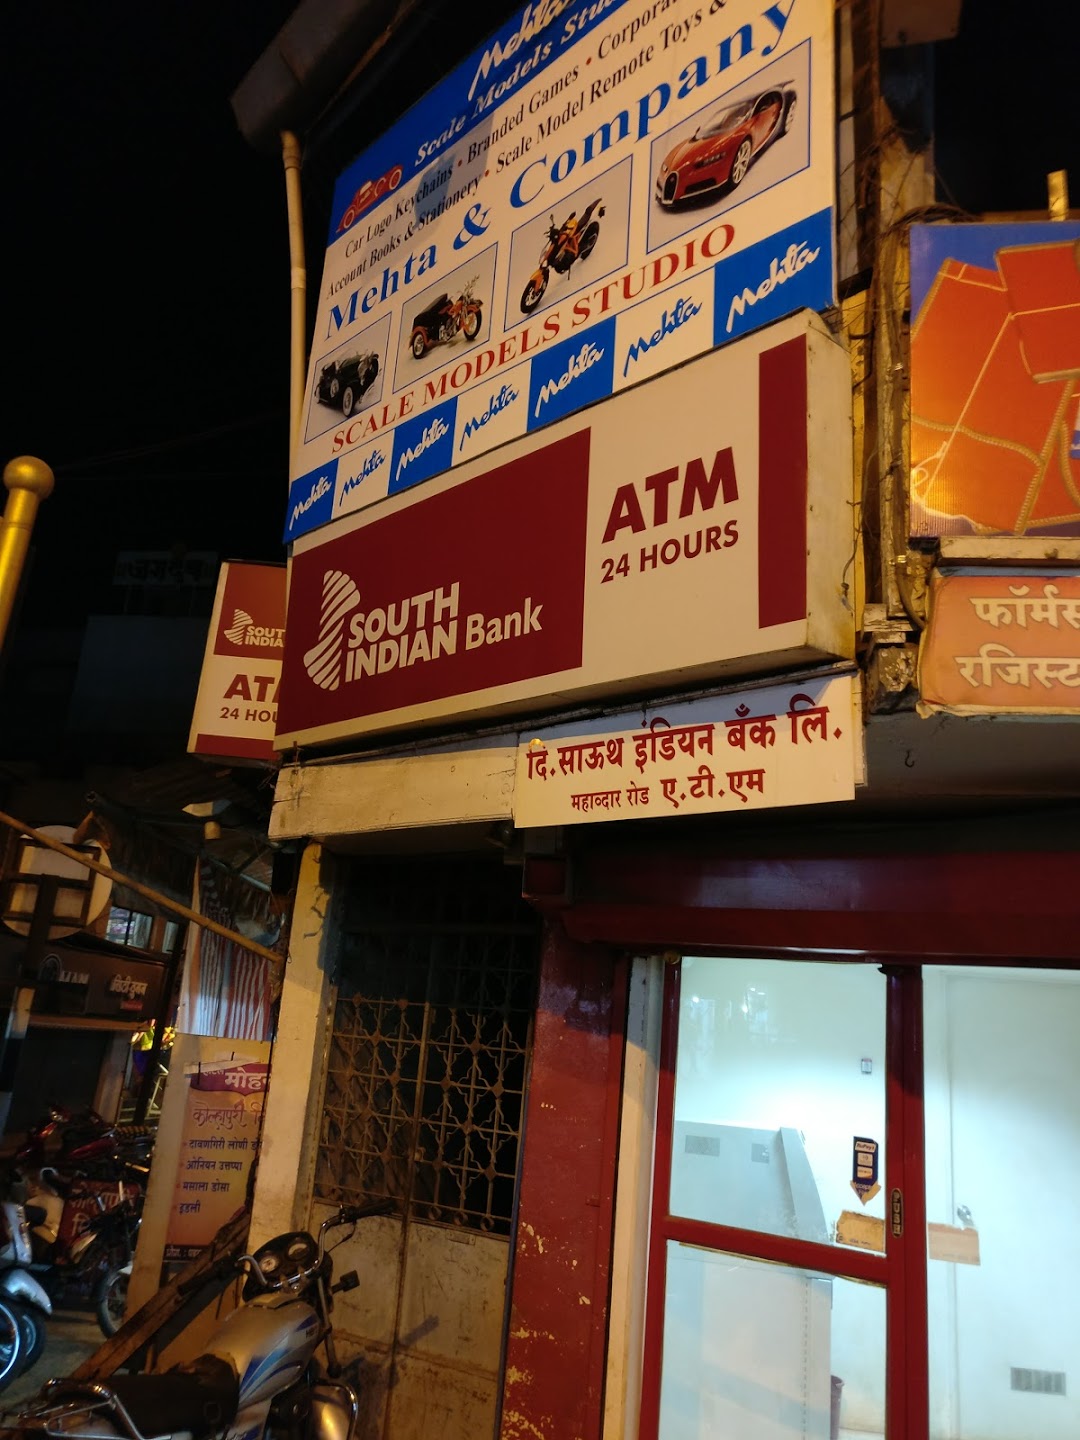 South Indian Bank ATM